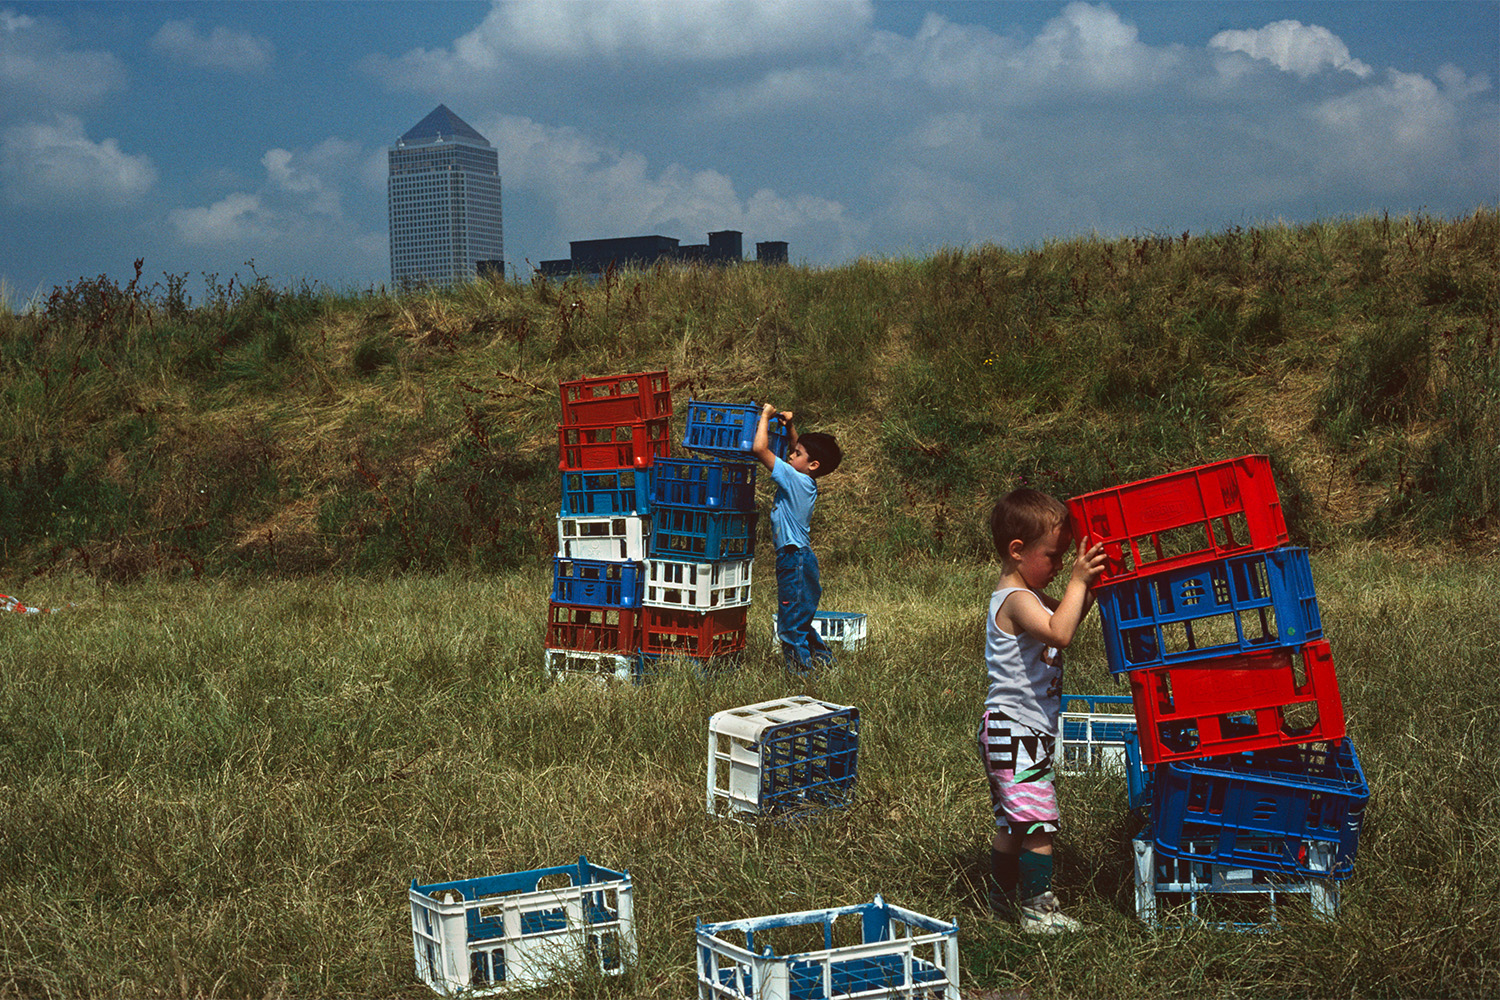 A pair of young boys playing with crates in a field.